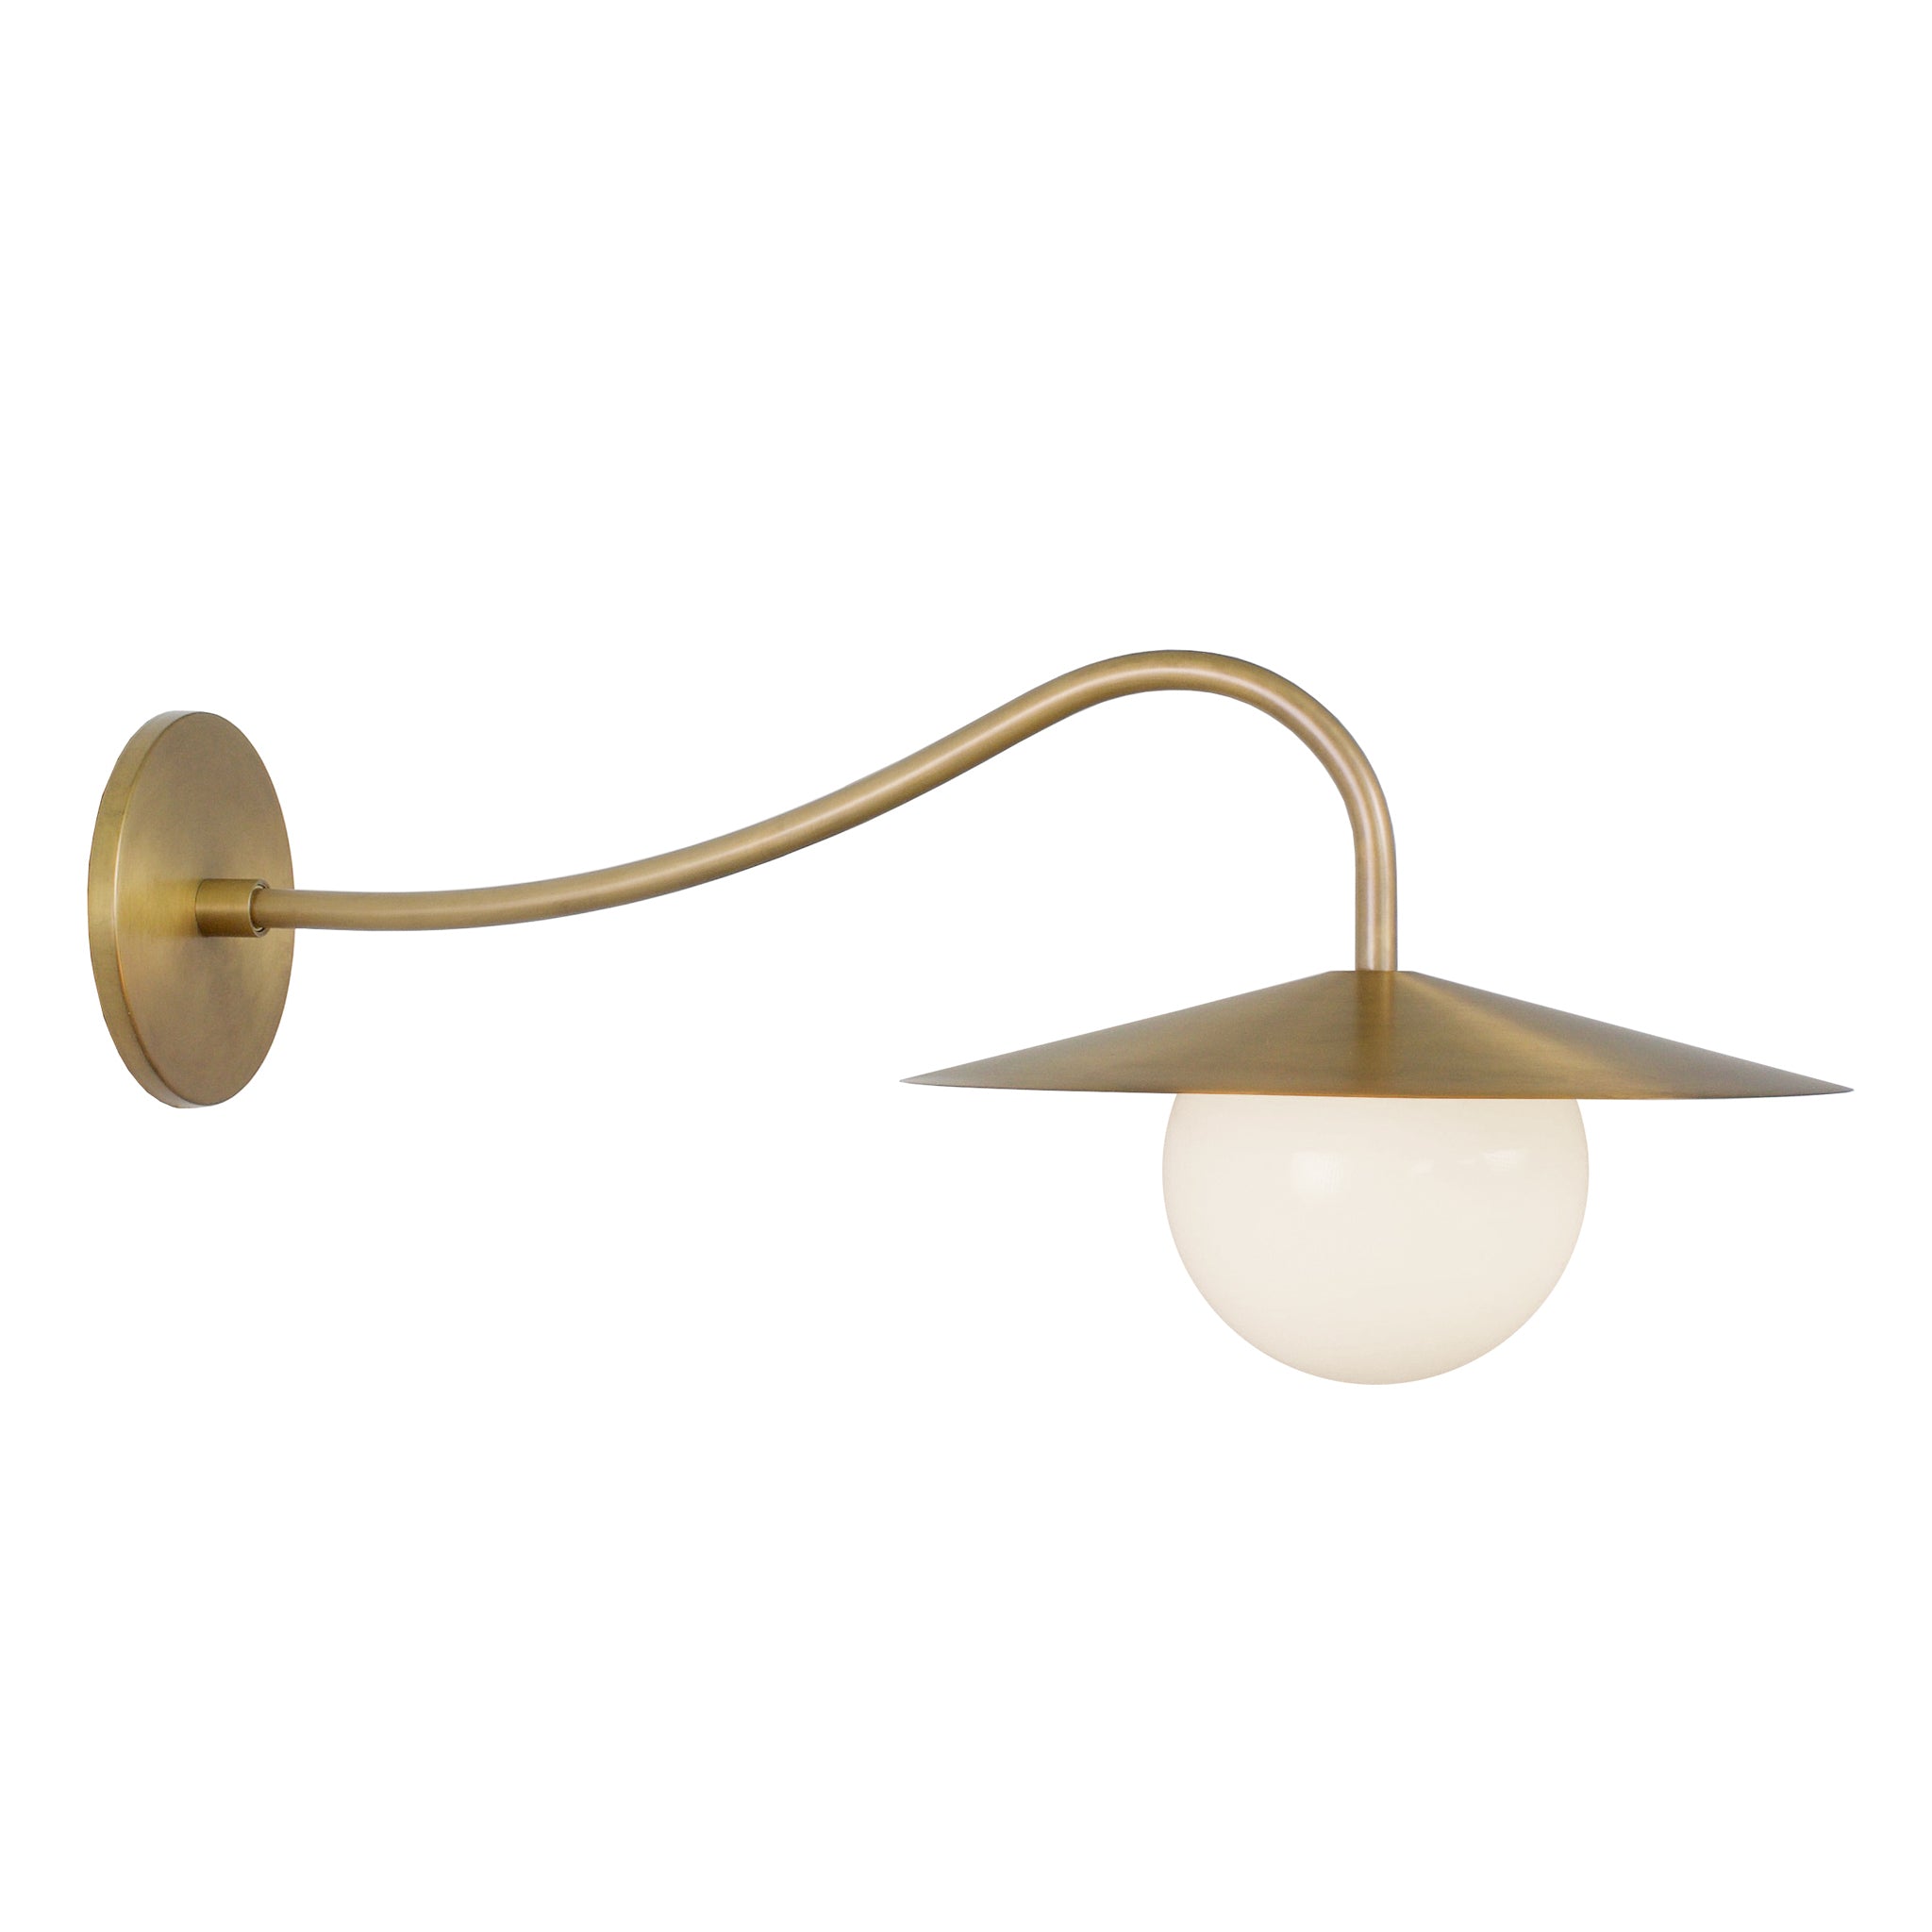  Wall Sconces - Brass / Wall Sconces / Wall Light Fixtures:  Tools & Home Improvement